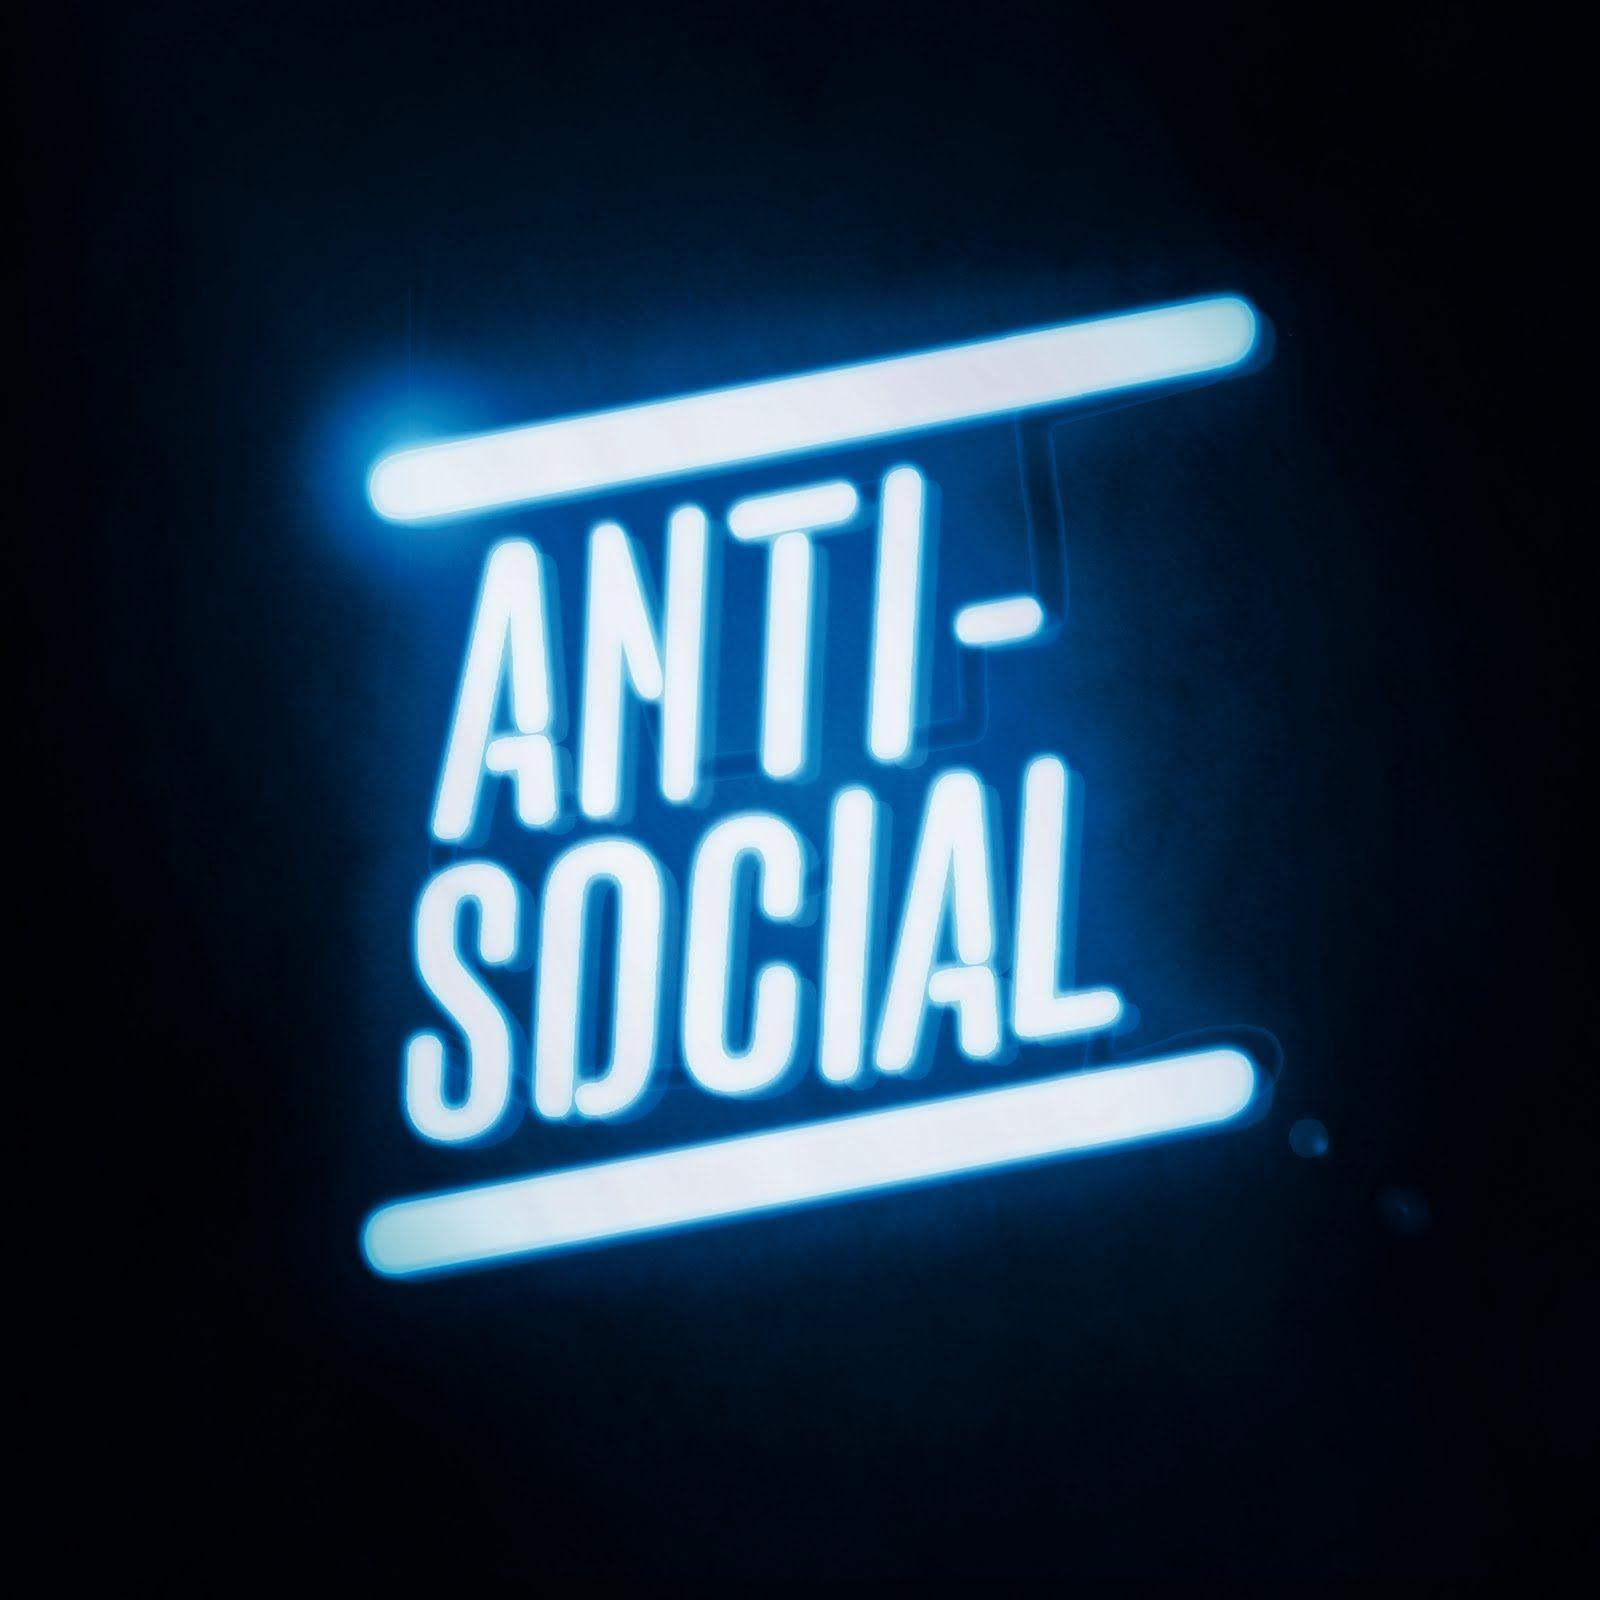 Top HD Antisocial Wallpaper. Others HD.56 KB